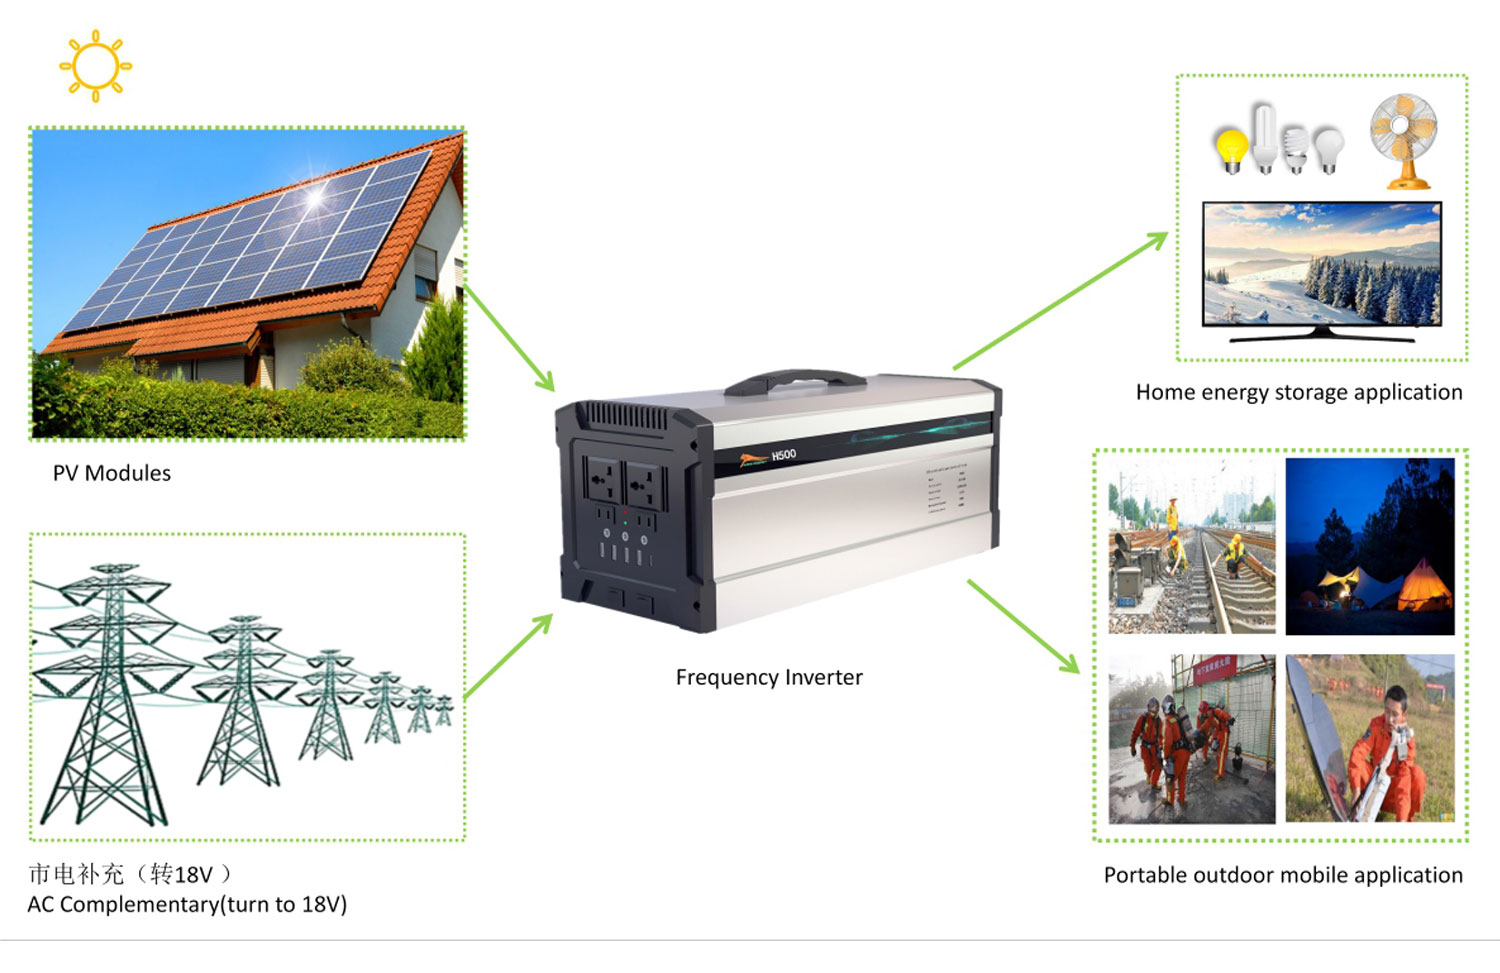 solar power system for home